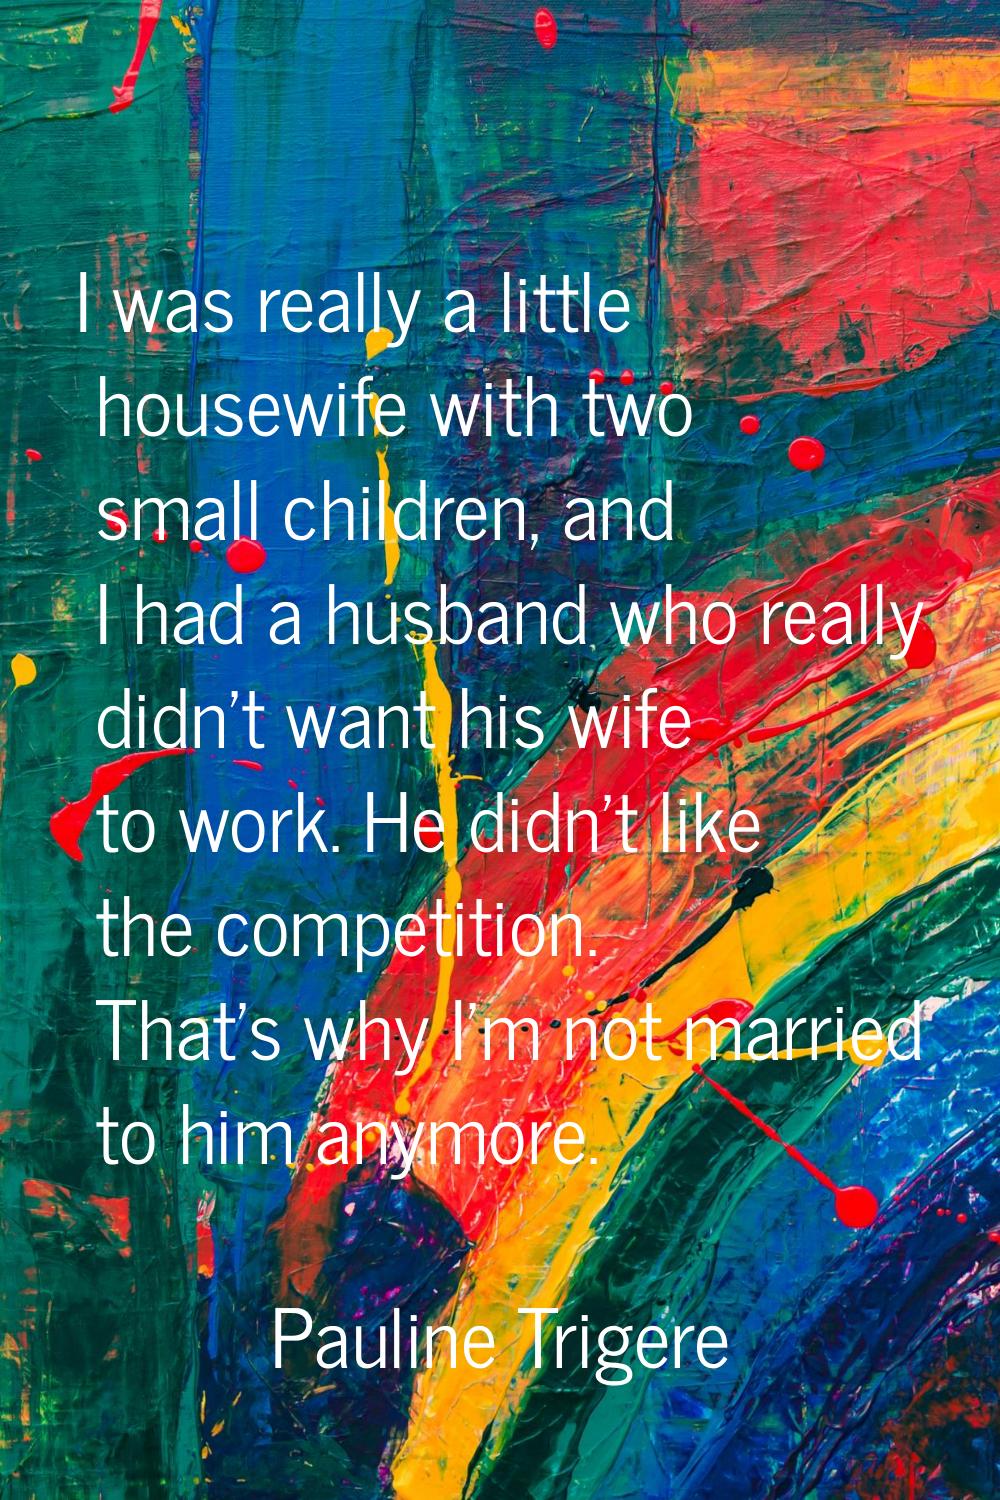 I was really a little housewife with two small children, and I had a husband who really didn't want